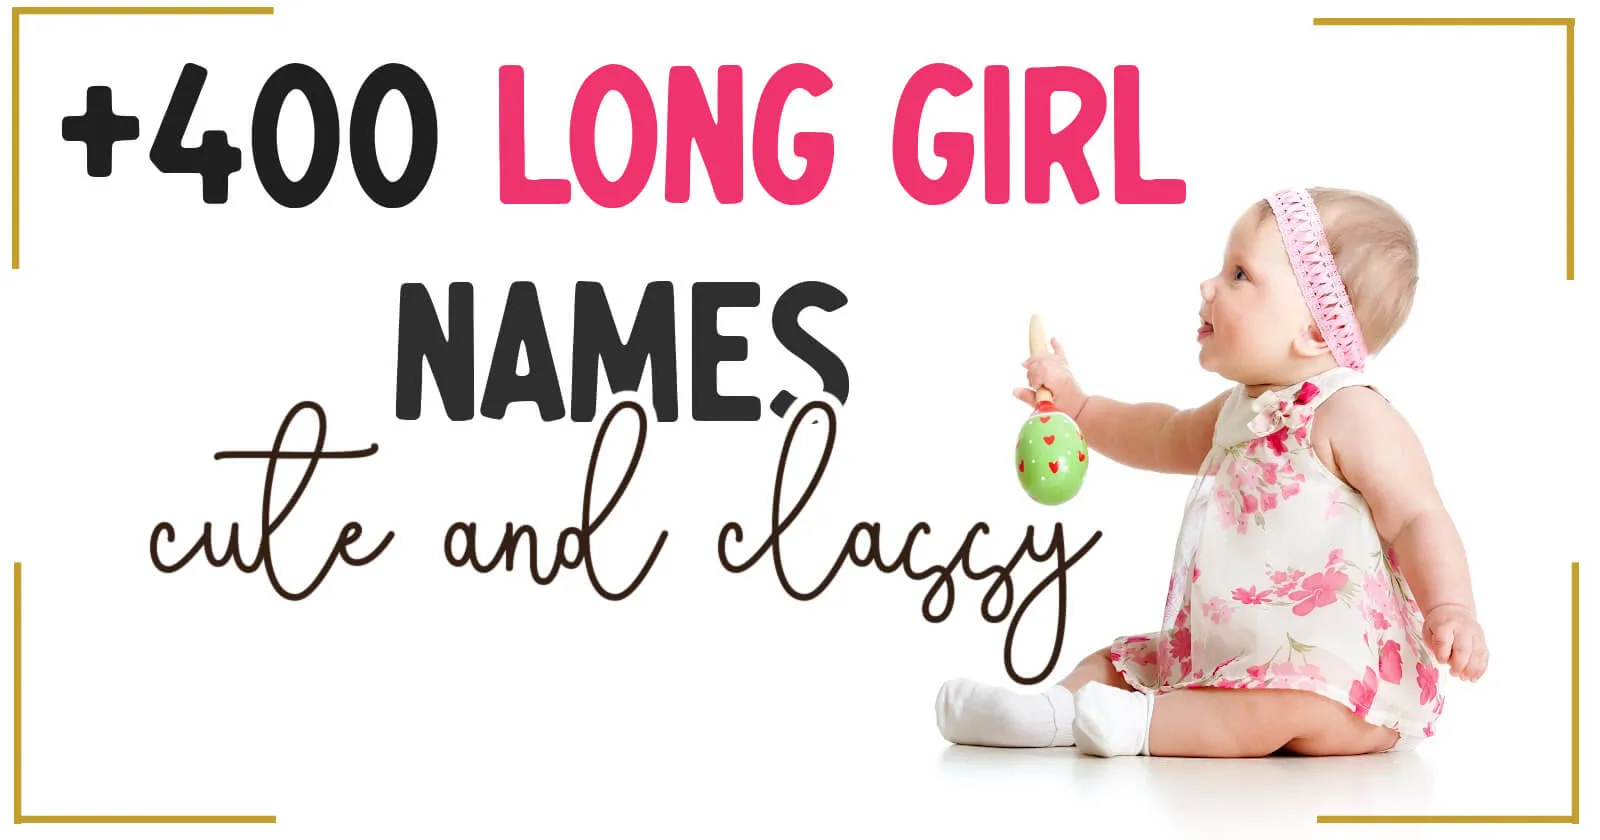 title very long girl names with image of baby girl sitting and holding a rattle